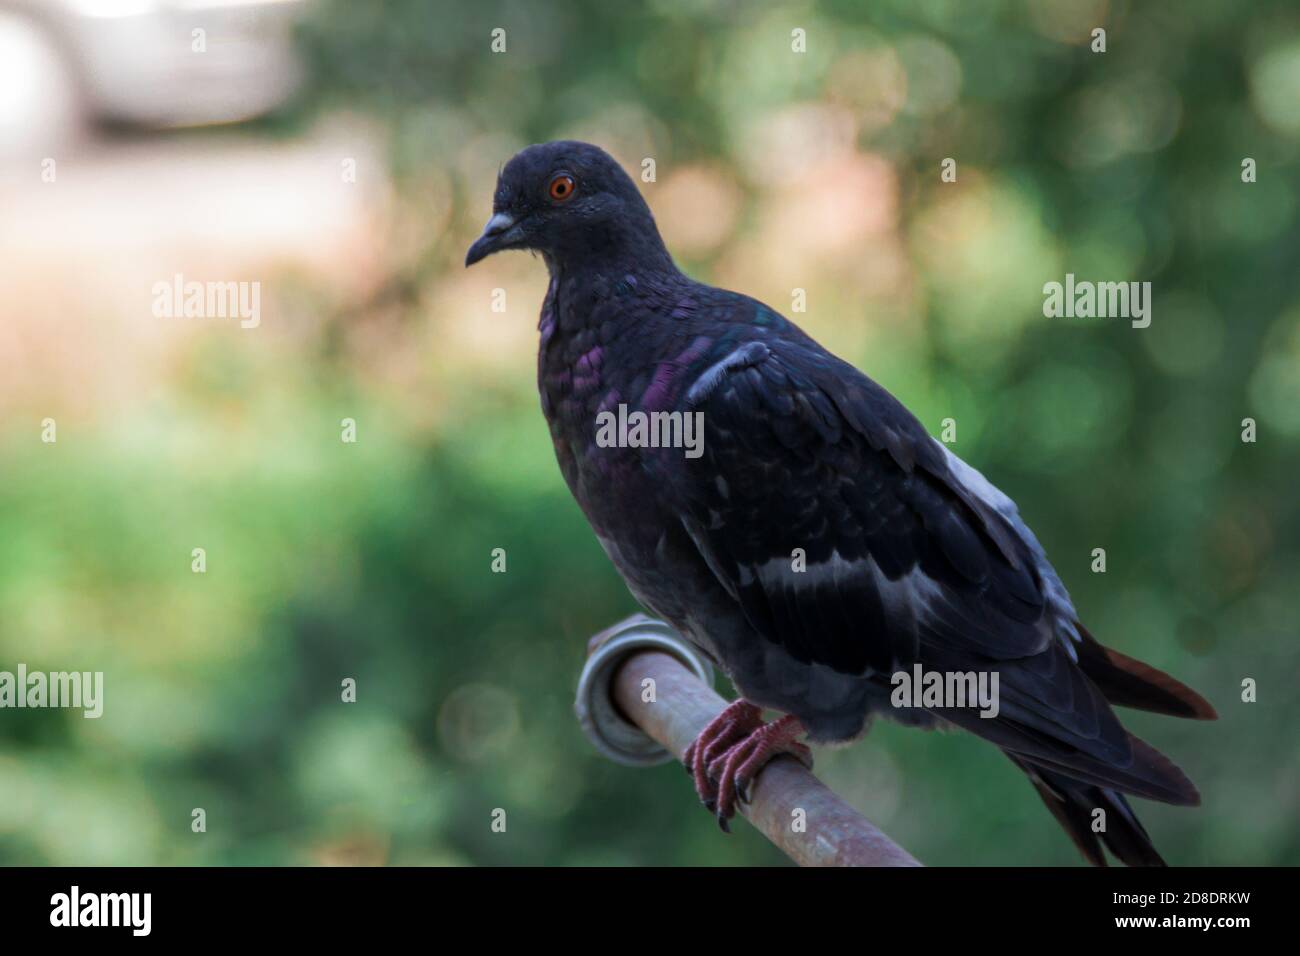 urban gray dove sits on the background of green foliage. Pigeon's feathering and orange eyes close up Stock Photo